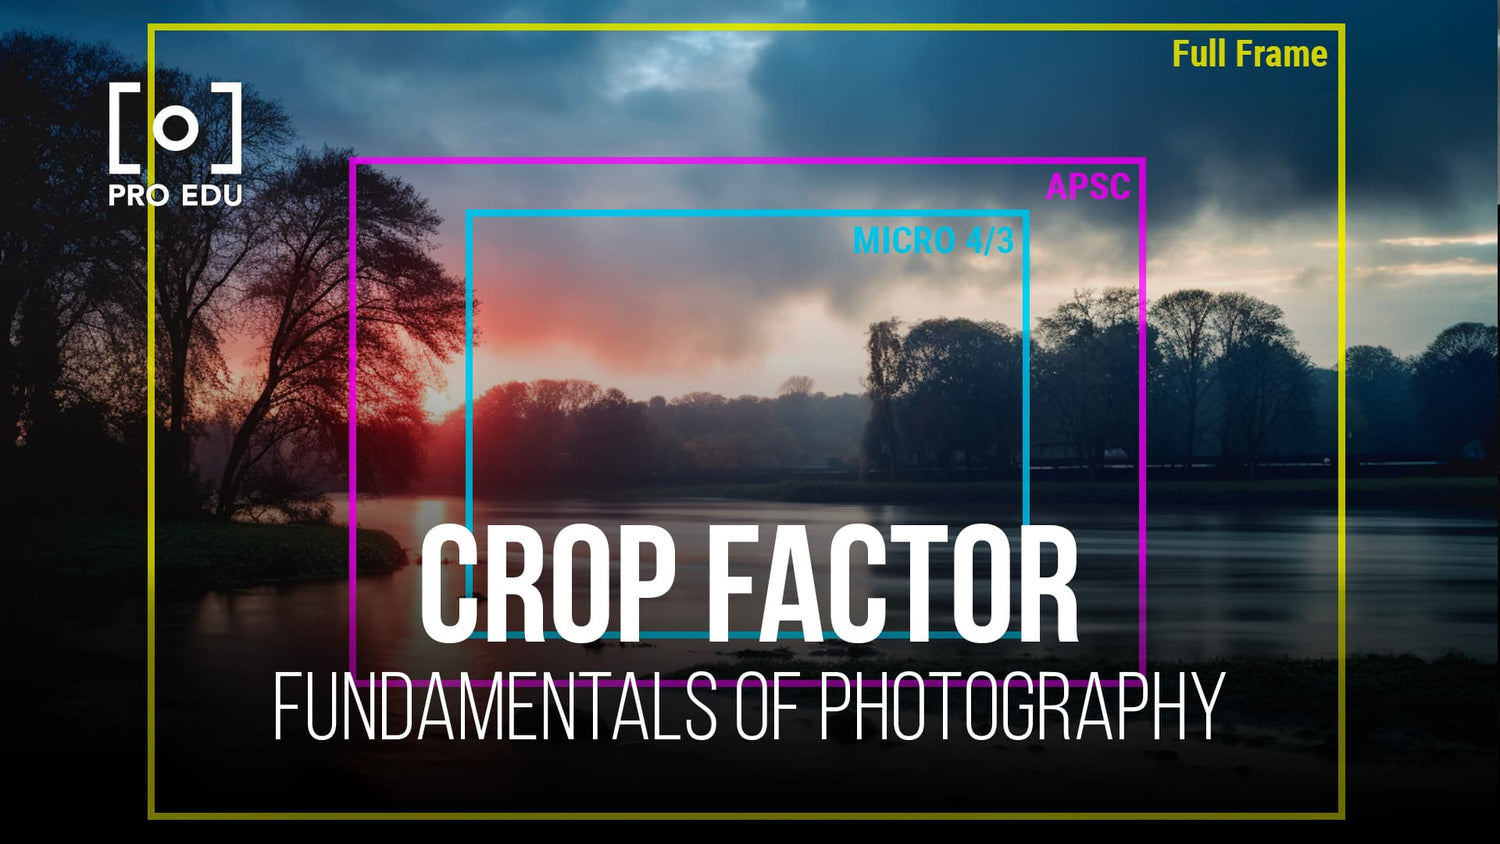 Understanding the impact of crop factor in photography for framing and composition